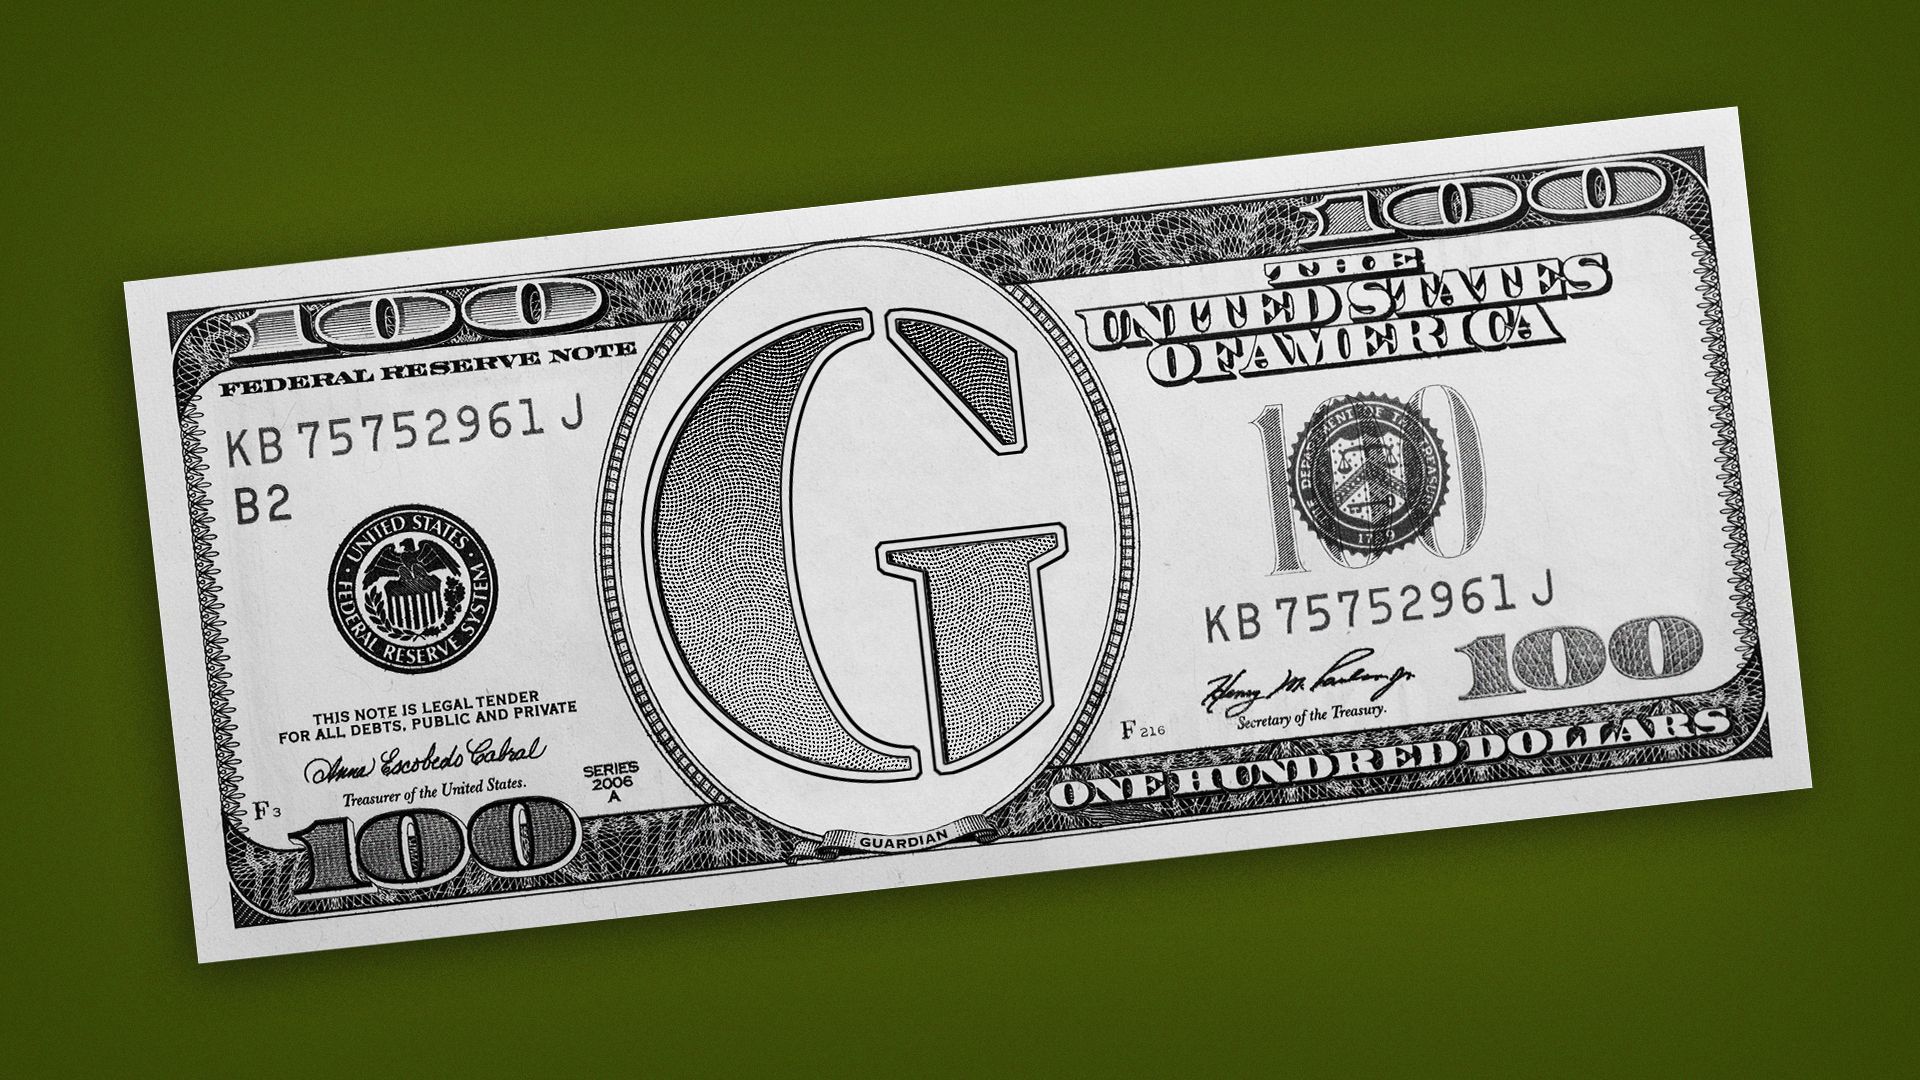 Illustration of a 100 dollar bill with The Guardian logo in the center.